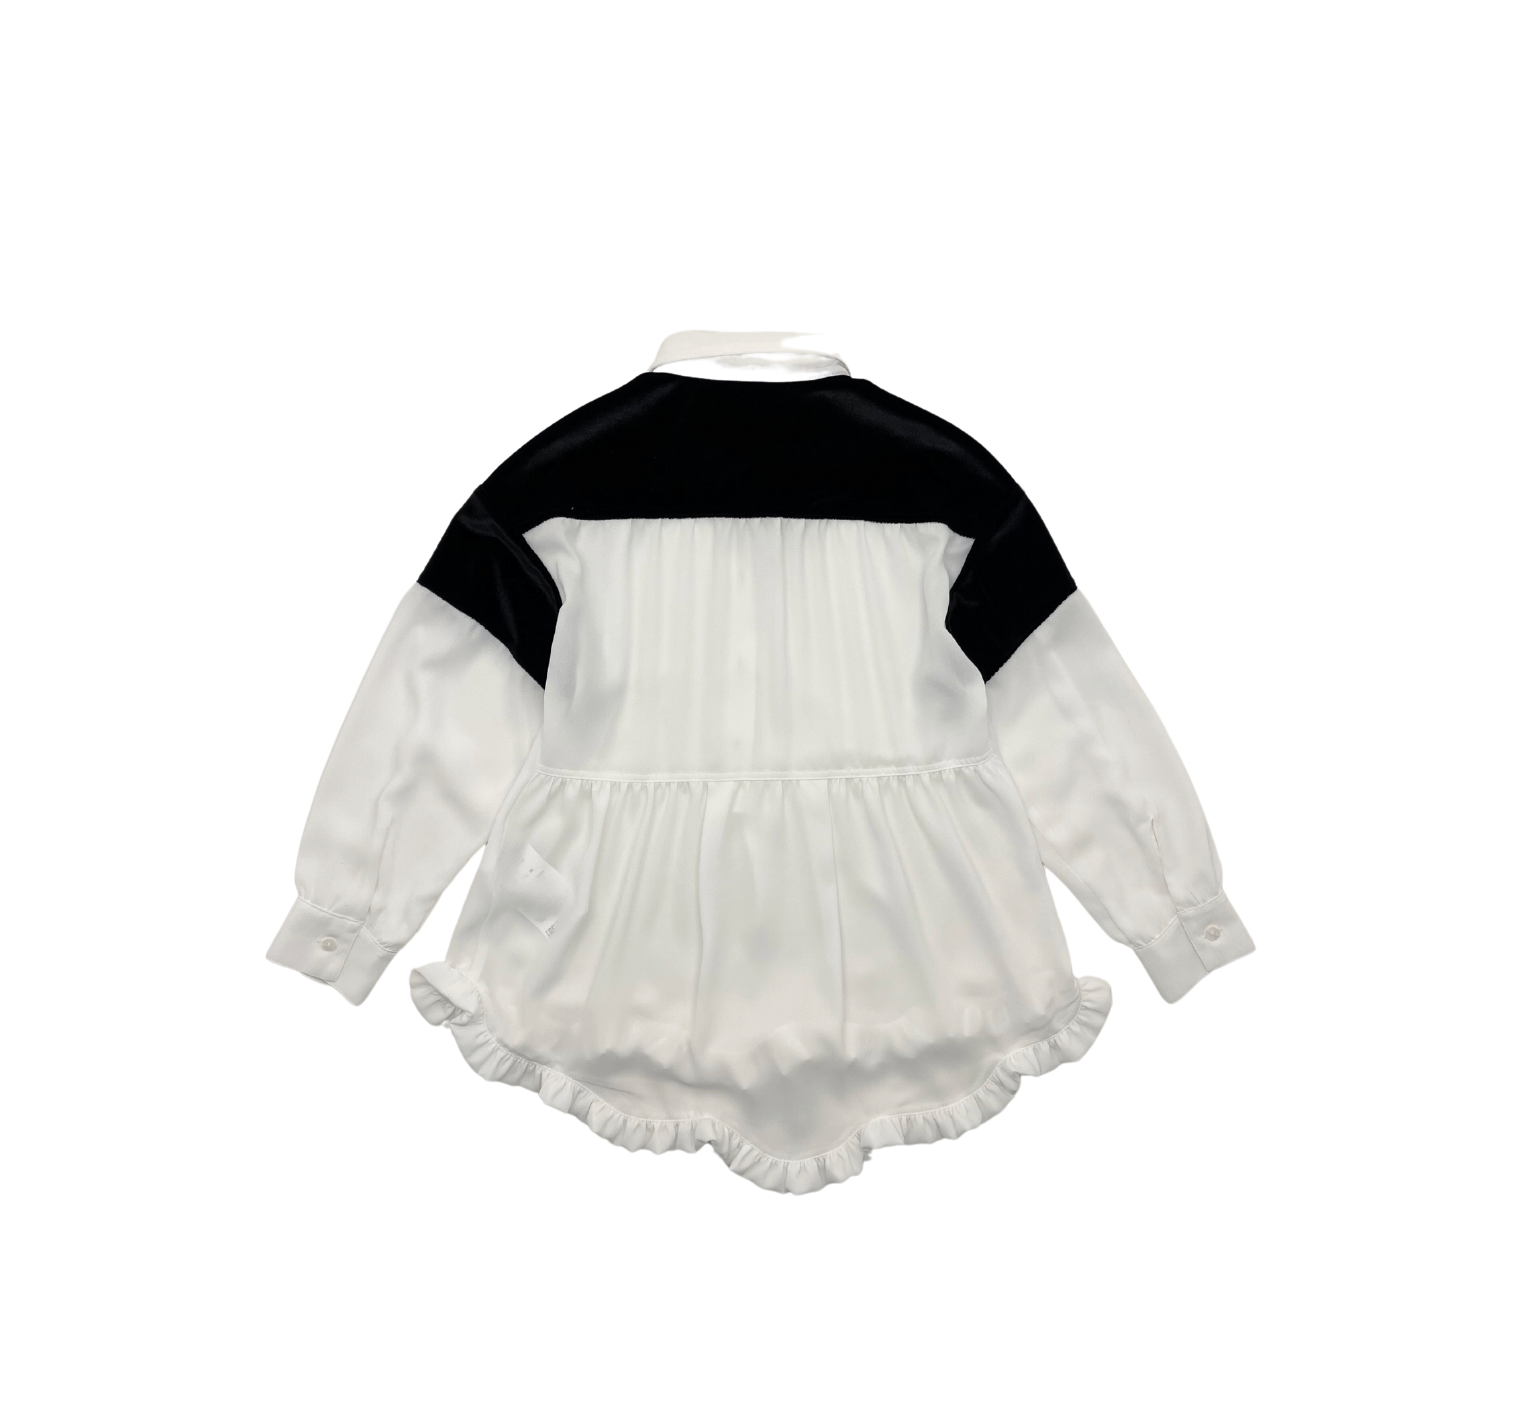 PHILOSOPHY DI LORENZO - Black &amp; white blouse with ruffle - 6 years old